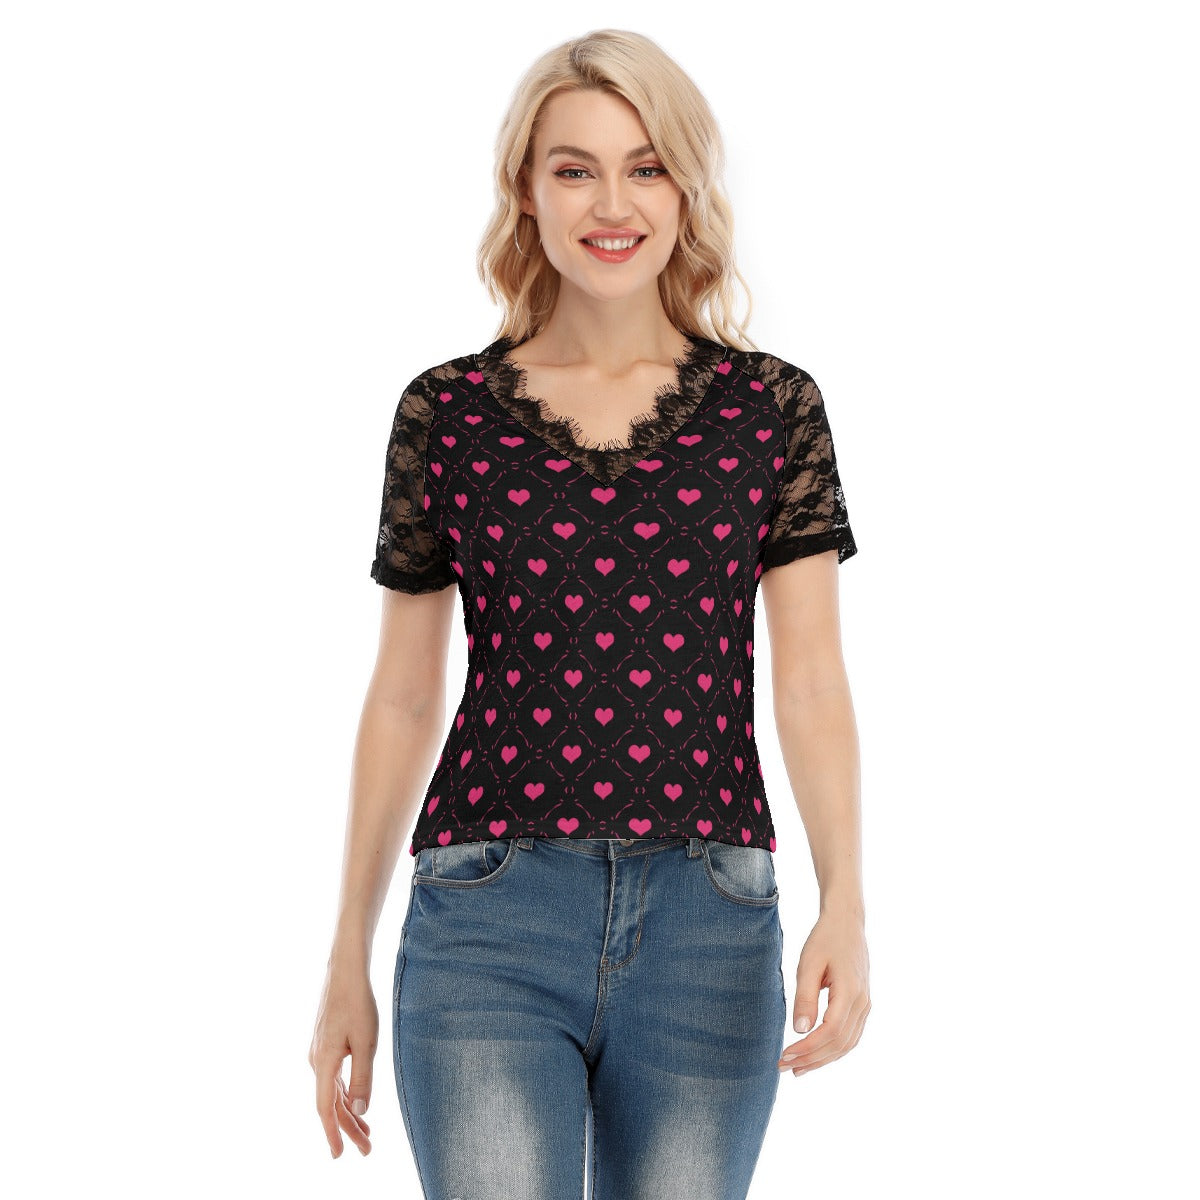 Little Pink Hearts V-neck T-shirt With Lace